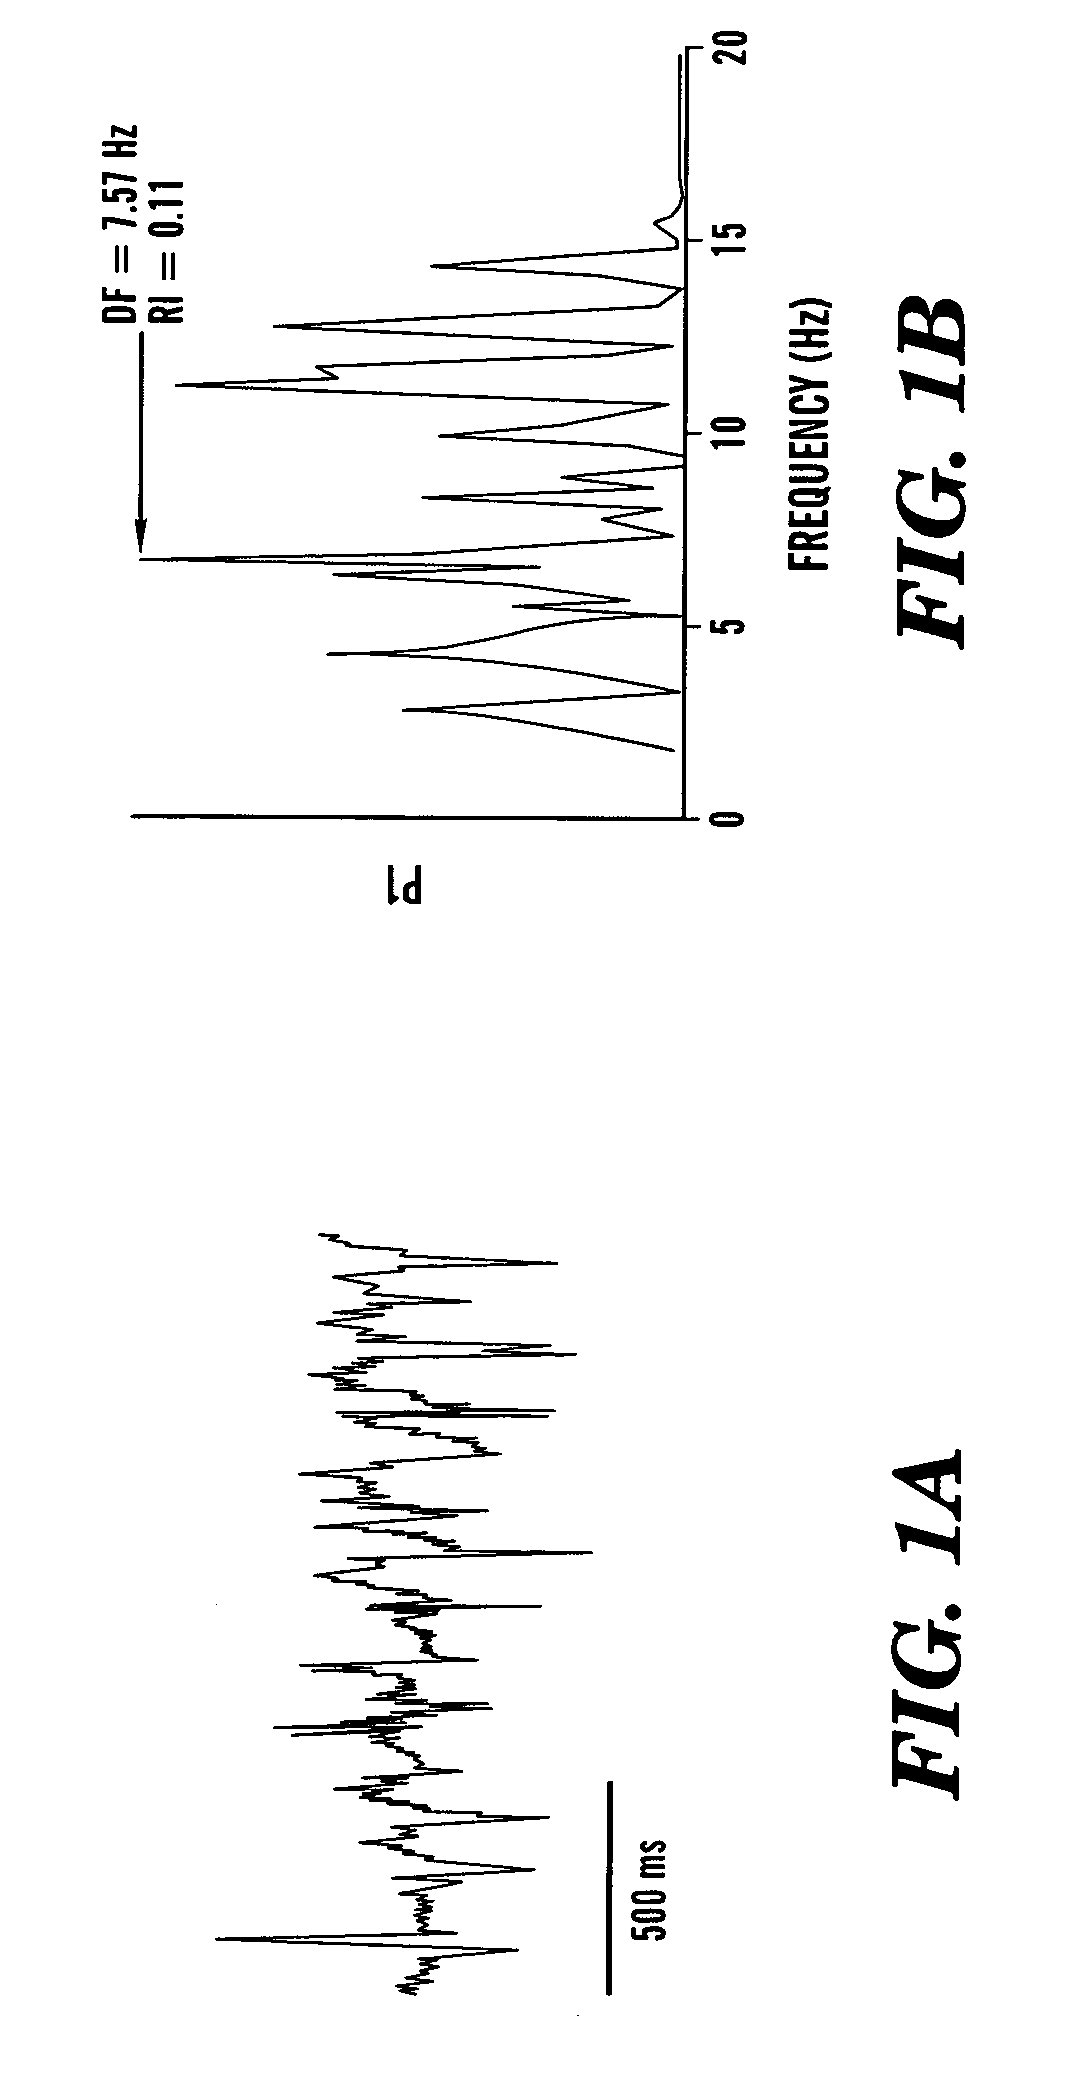 Method and algorithm for spatially identifying sources of cardiac fibrillation